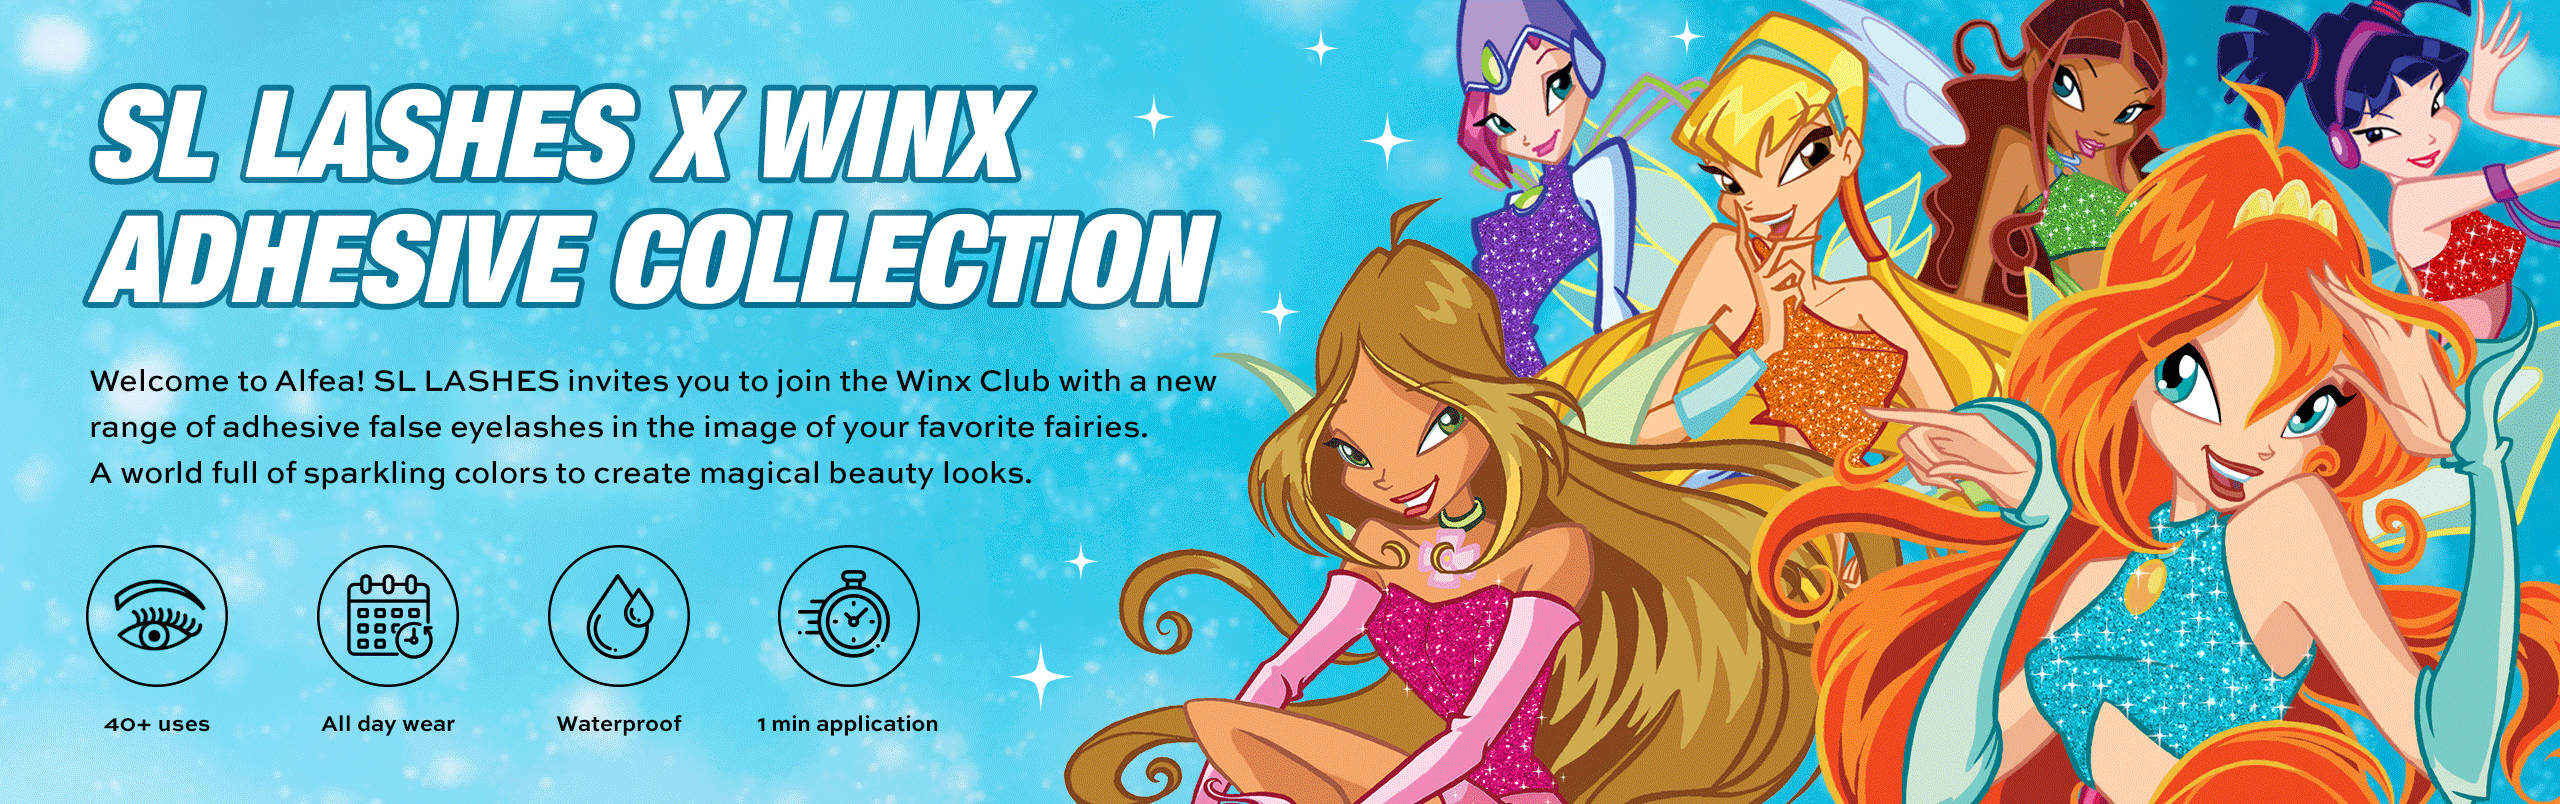 Banner for WINX Club